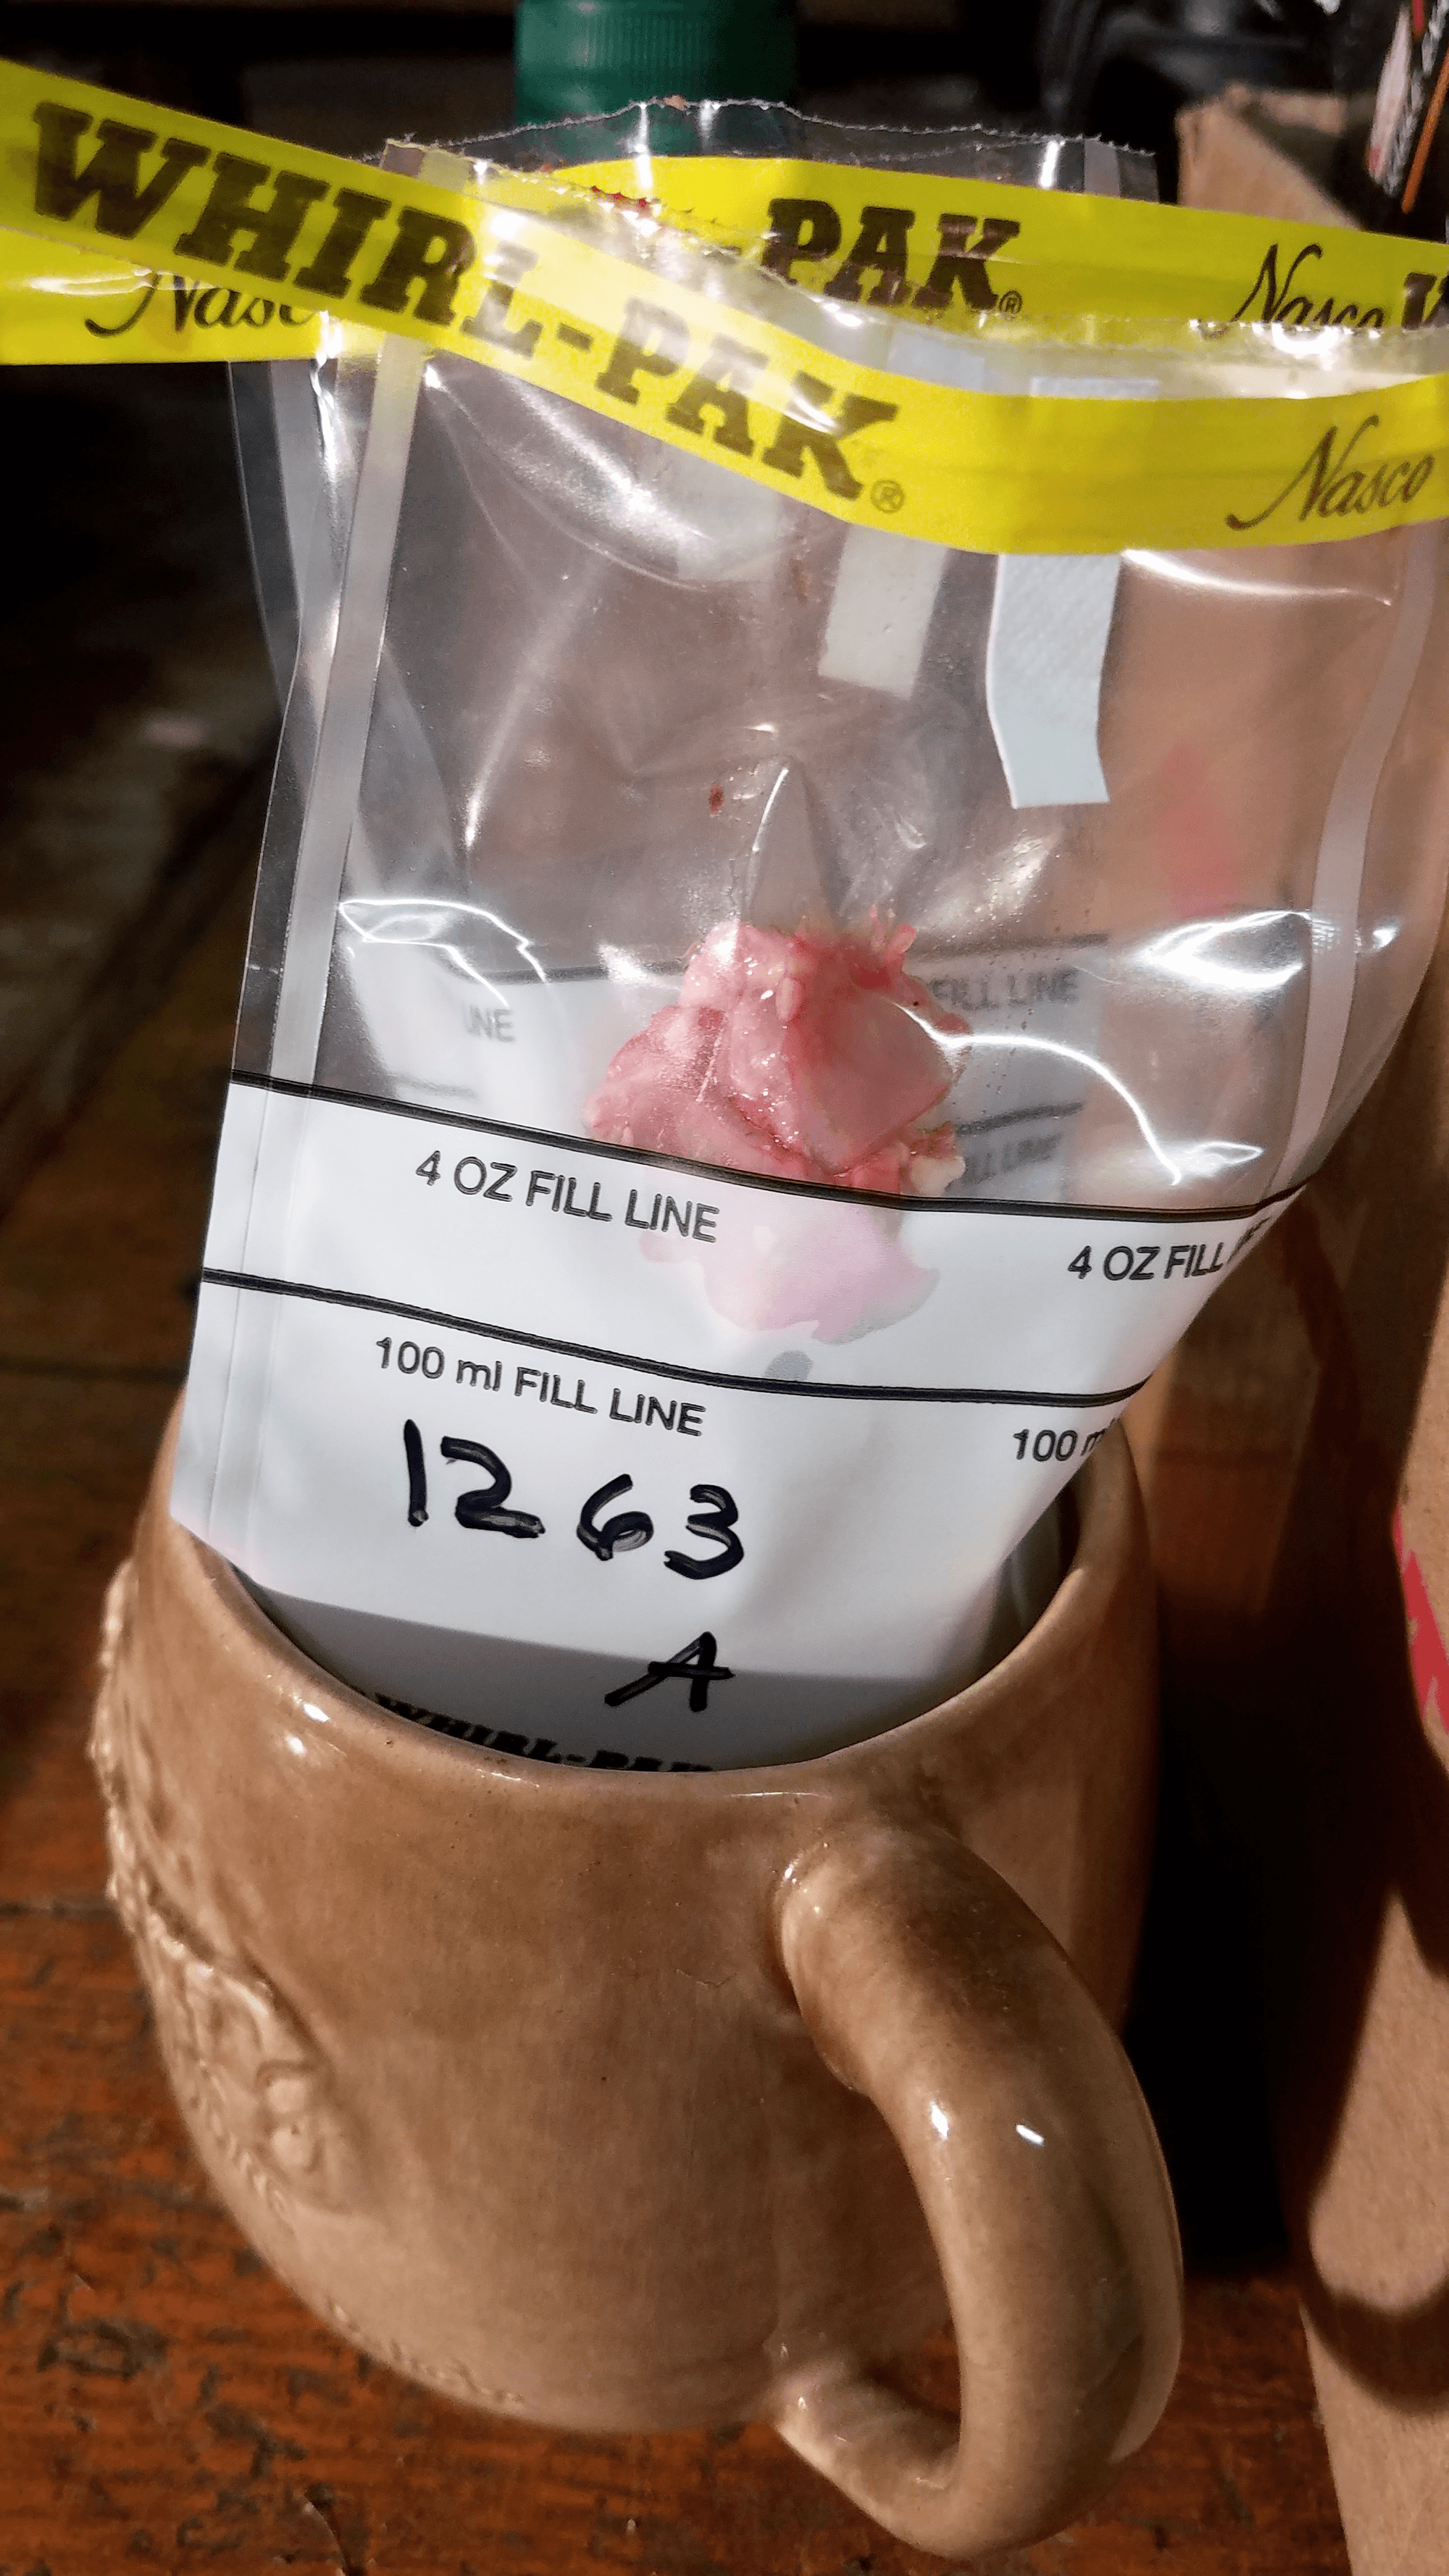 Close up of a sample bag with a lymph node inside. The bag is sitting in a brown ceramic mug and the label reads "1263 A"